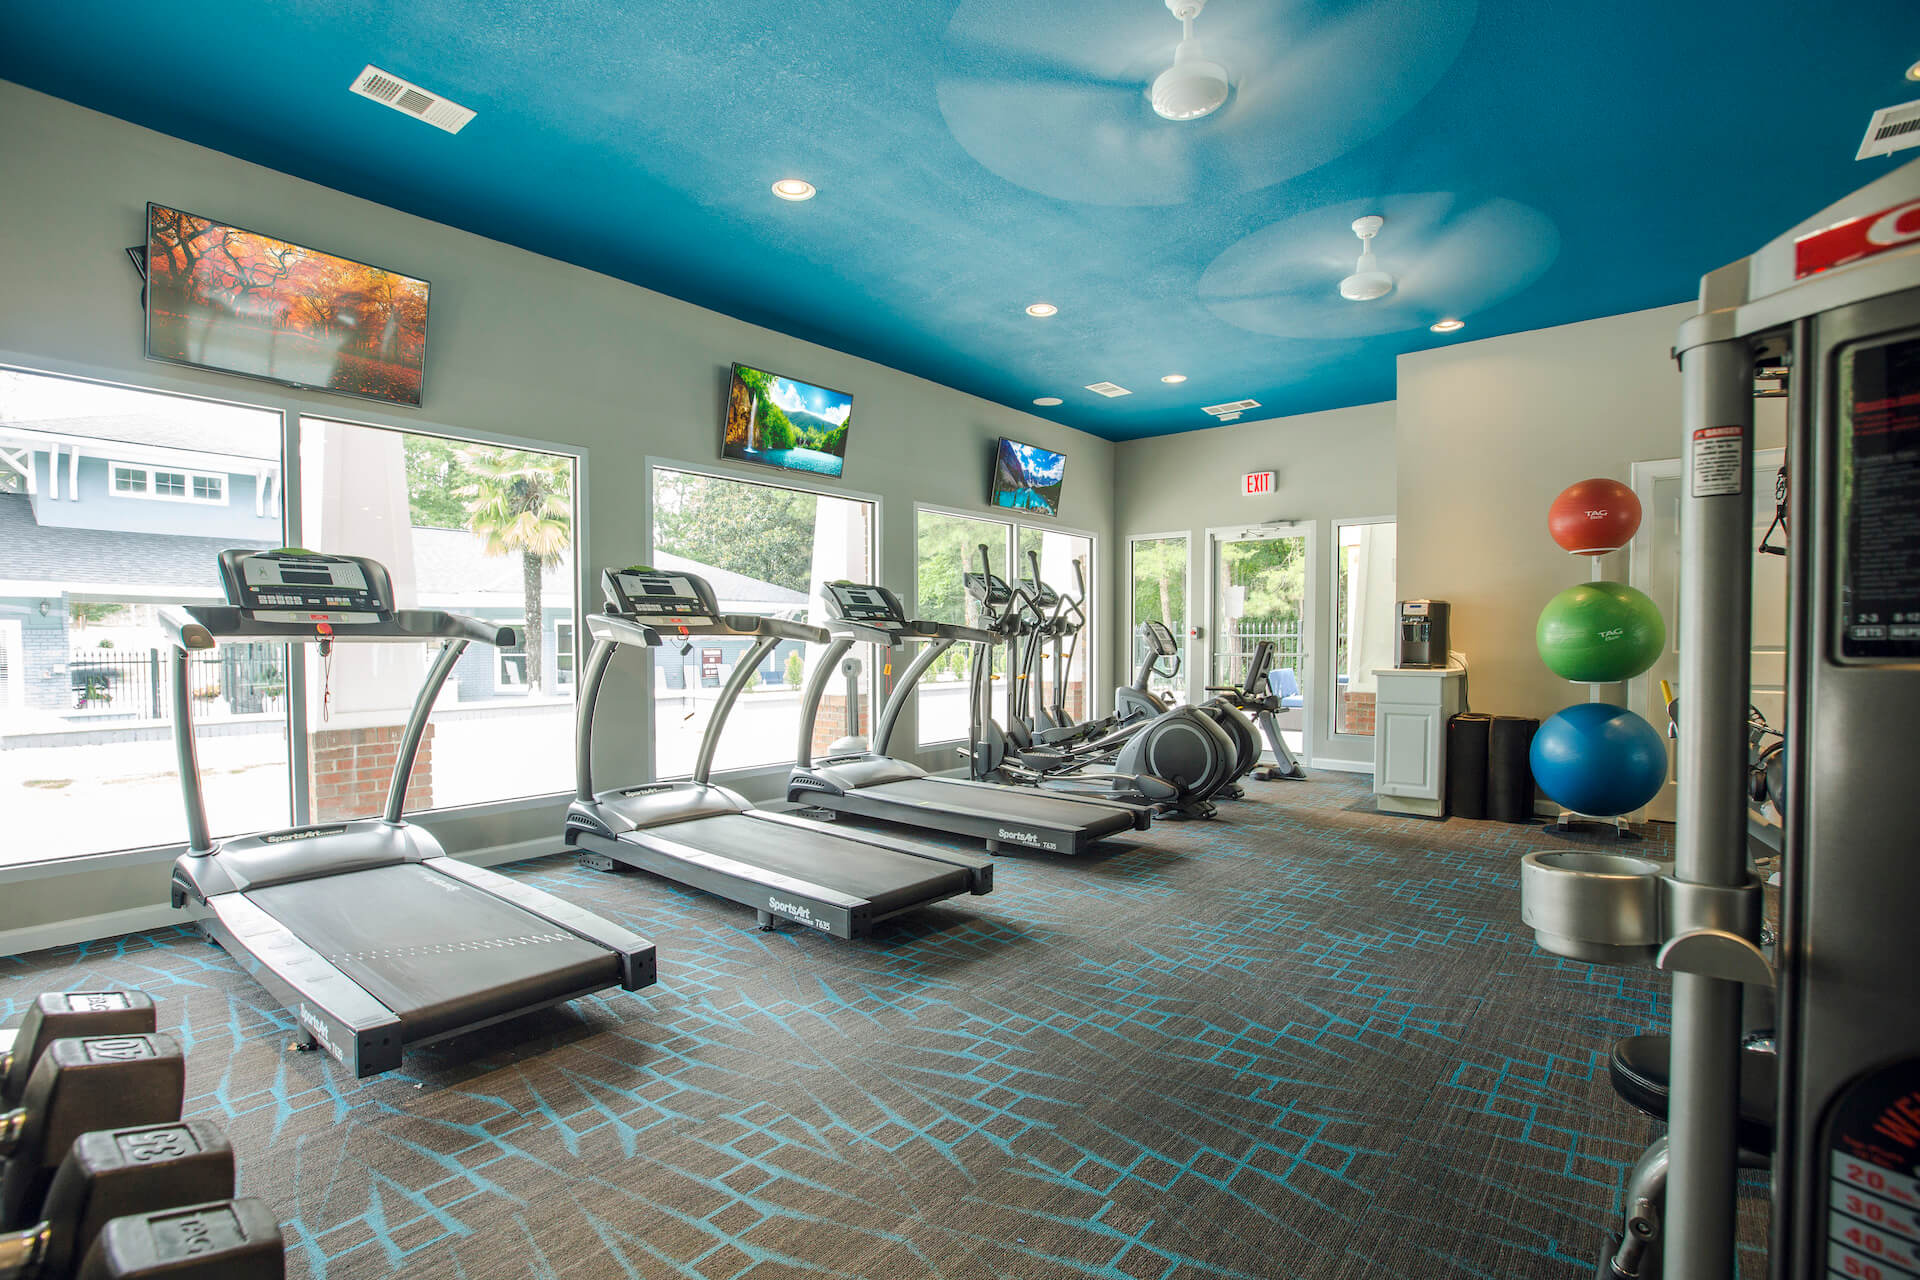 state-of-the-art fitness center showing treadmills, stationary bikes and wall-mounted TVs